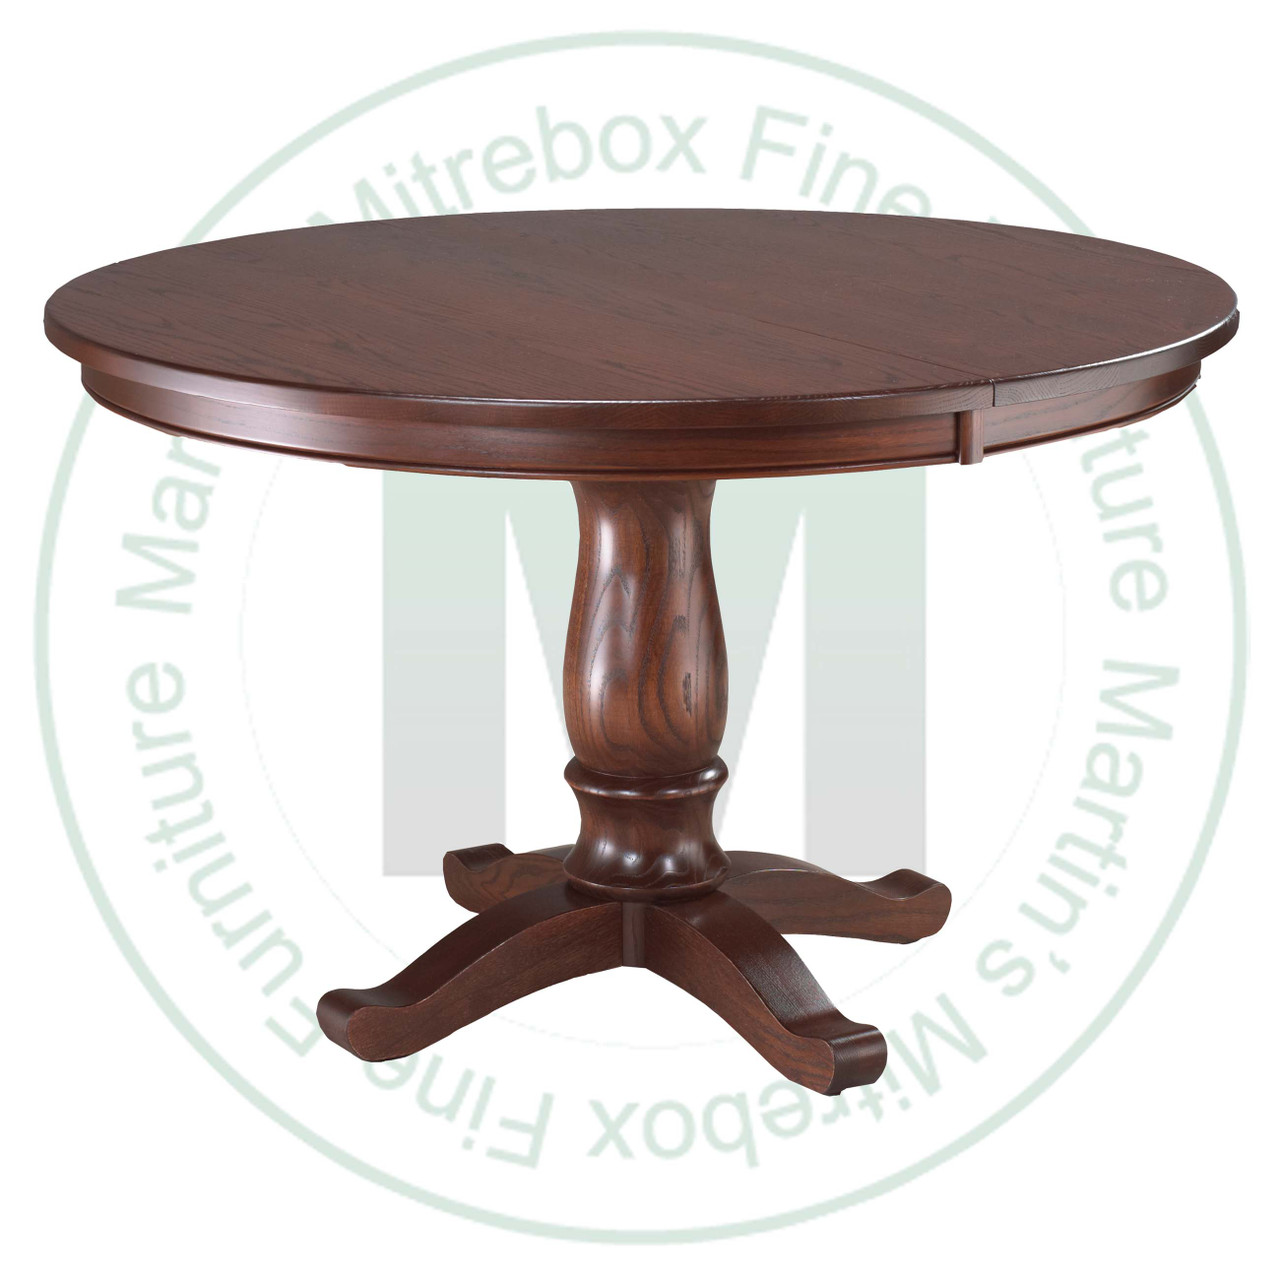 Wormy Maple Kimberly Crest Single Pedestal Table 54''D x 54''W x 30''H Round Solid Table